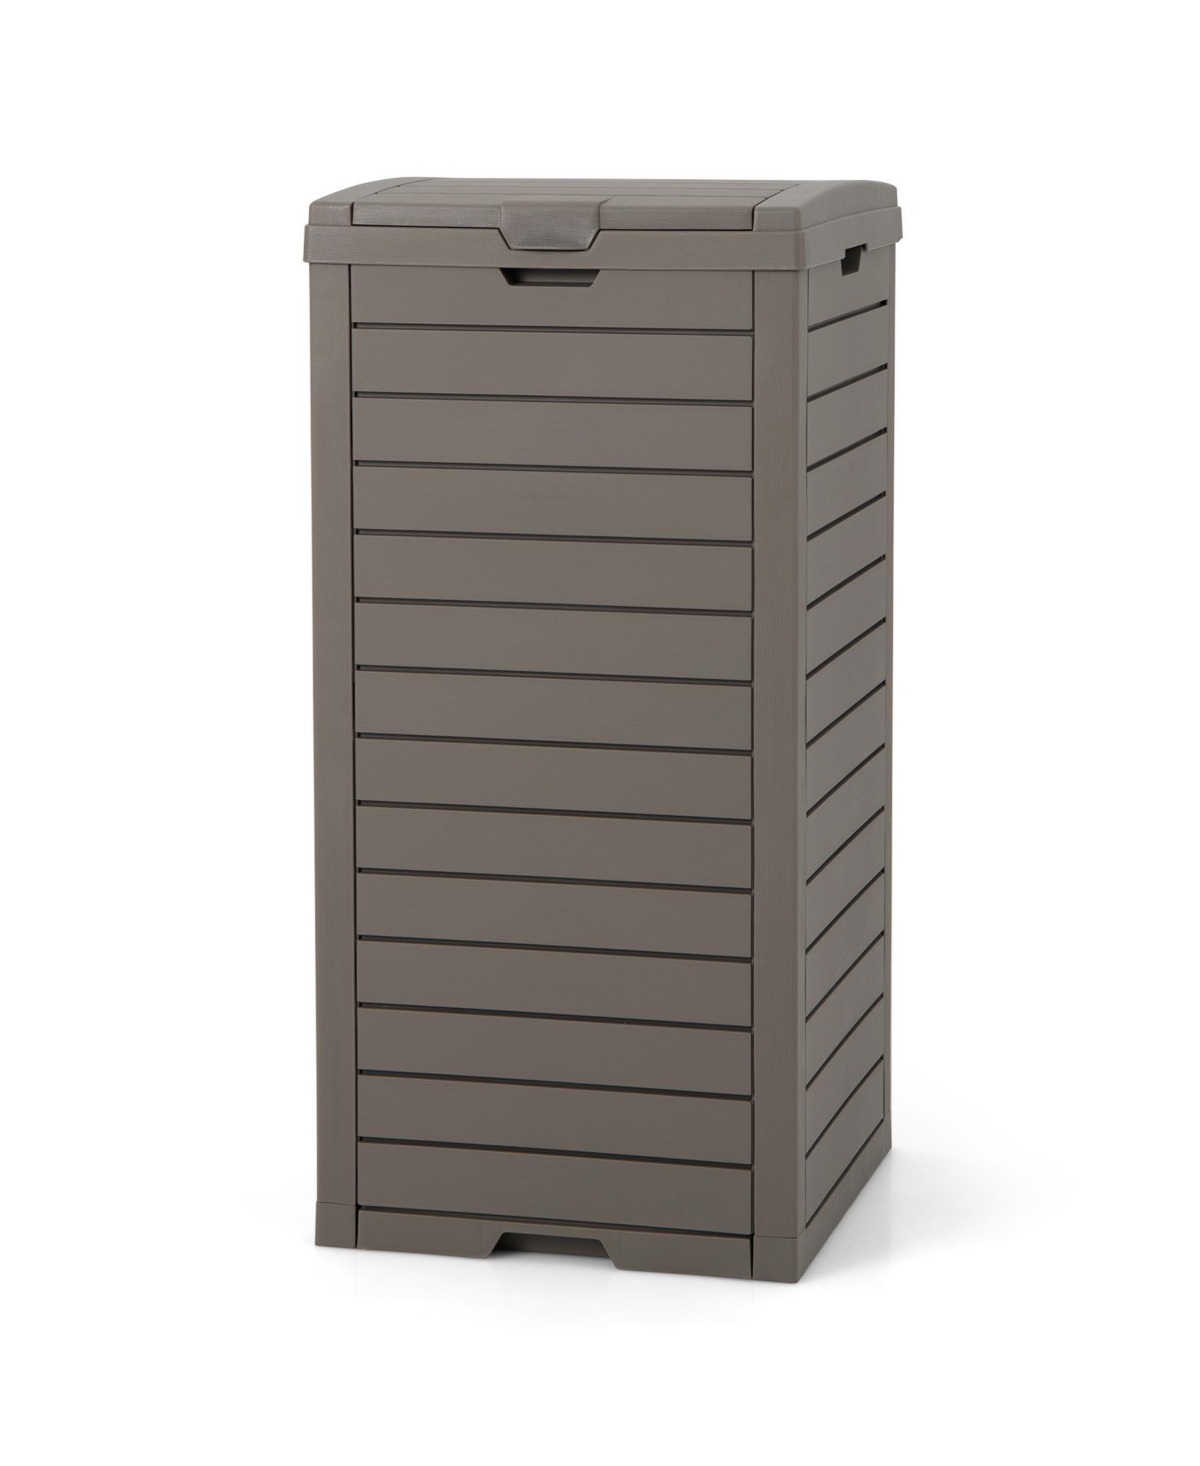 31 Gallon Large Outdoor Trash Can with Lid and Pull-out Liquid Drawer - Grey